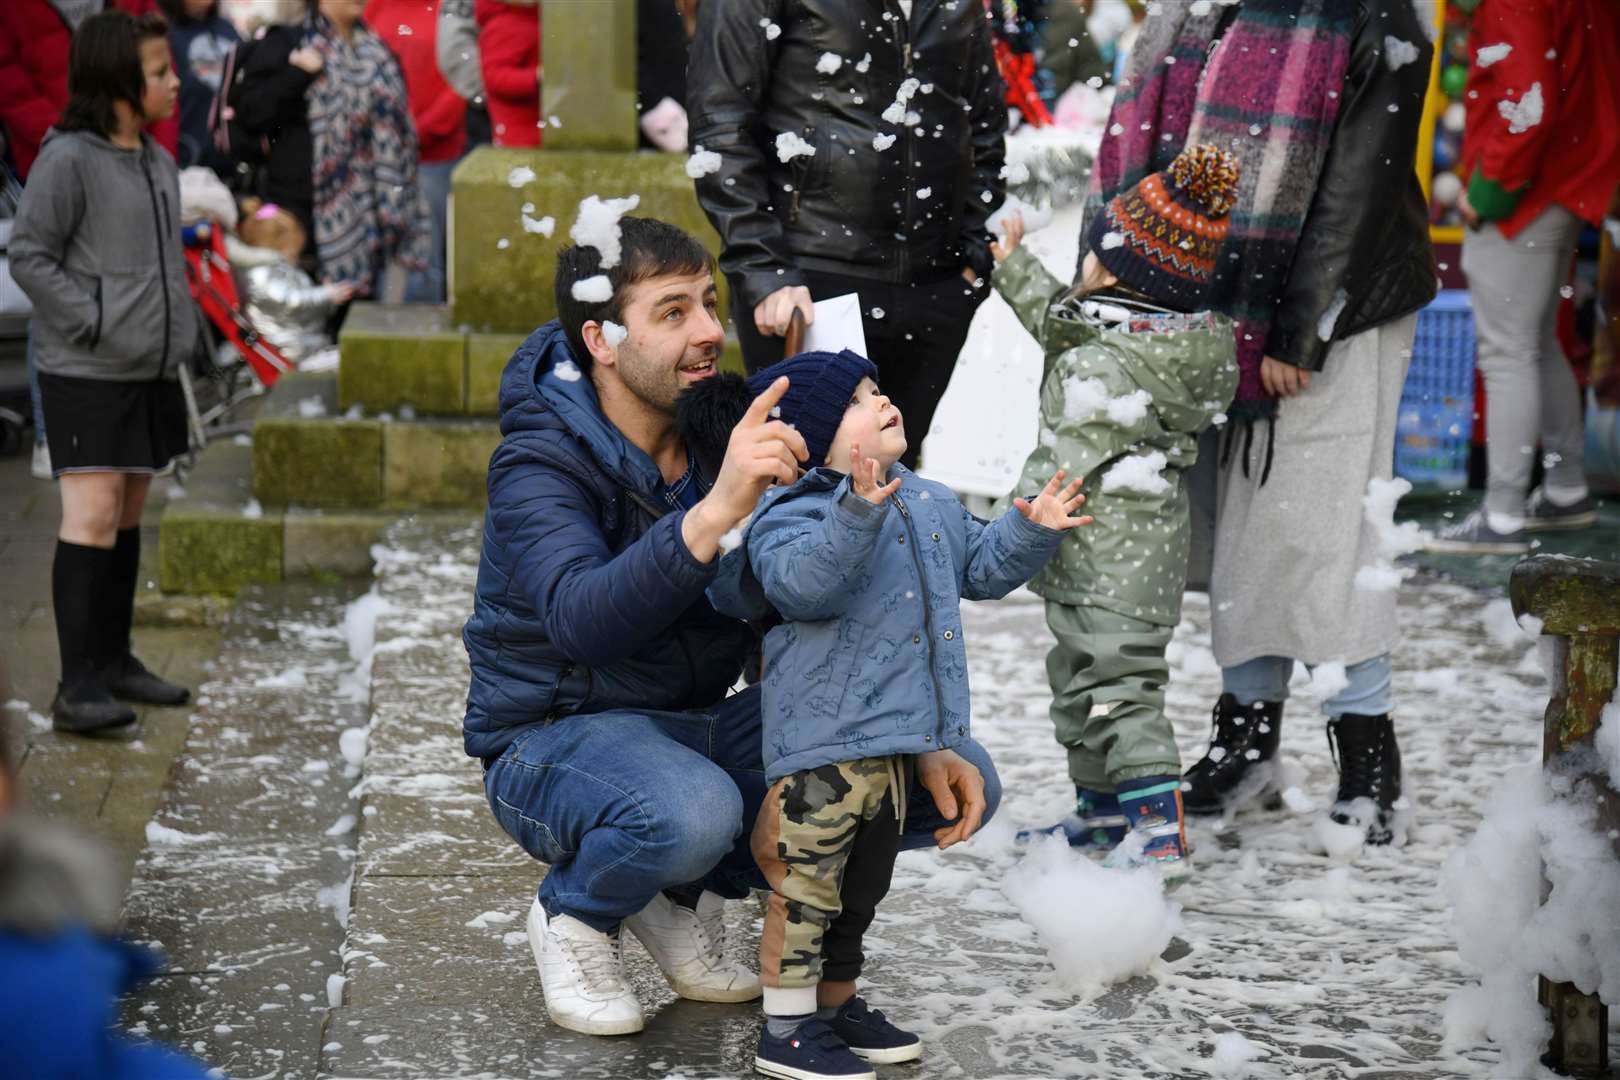 Mark and Finlay West enjoying the foam machine at the Christmas Cracker. ..Banff Christmas Cracker, 2022...Picture: Beth Taylor.